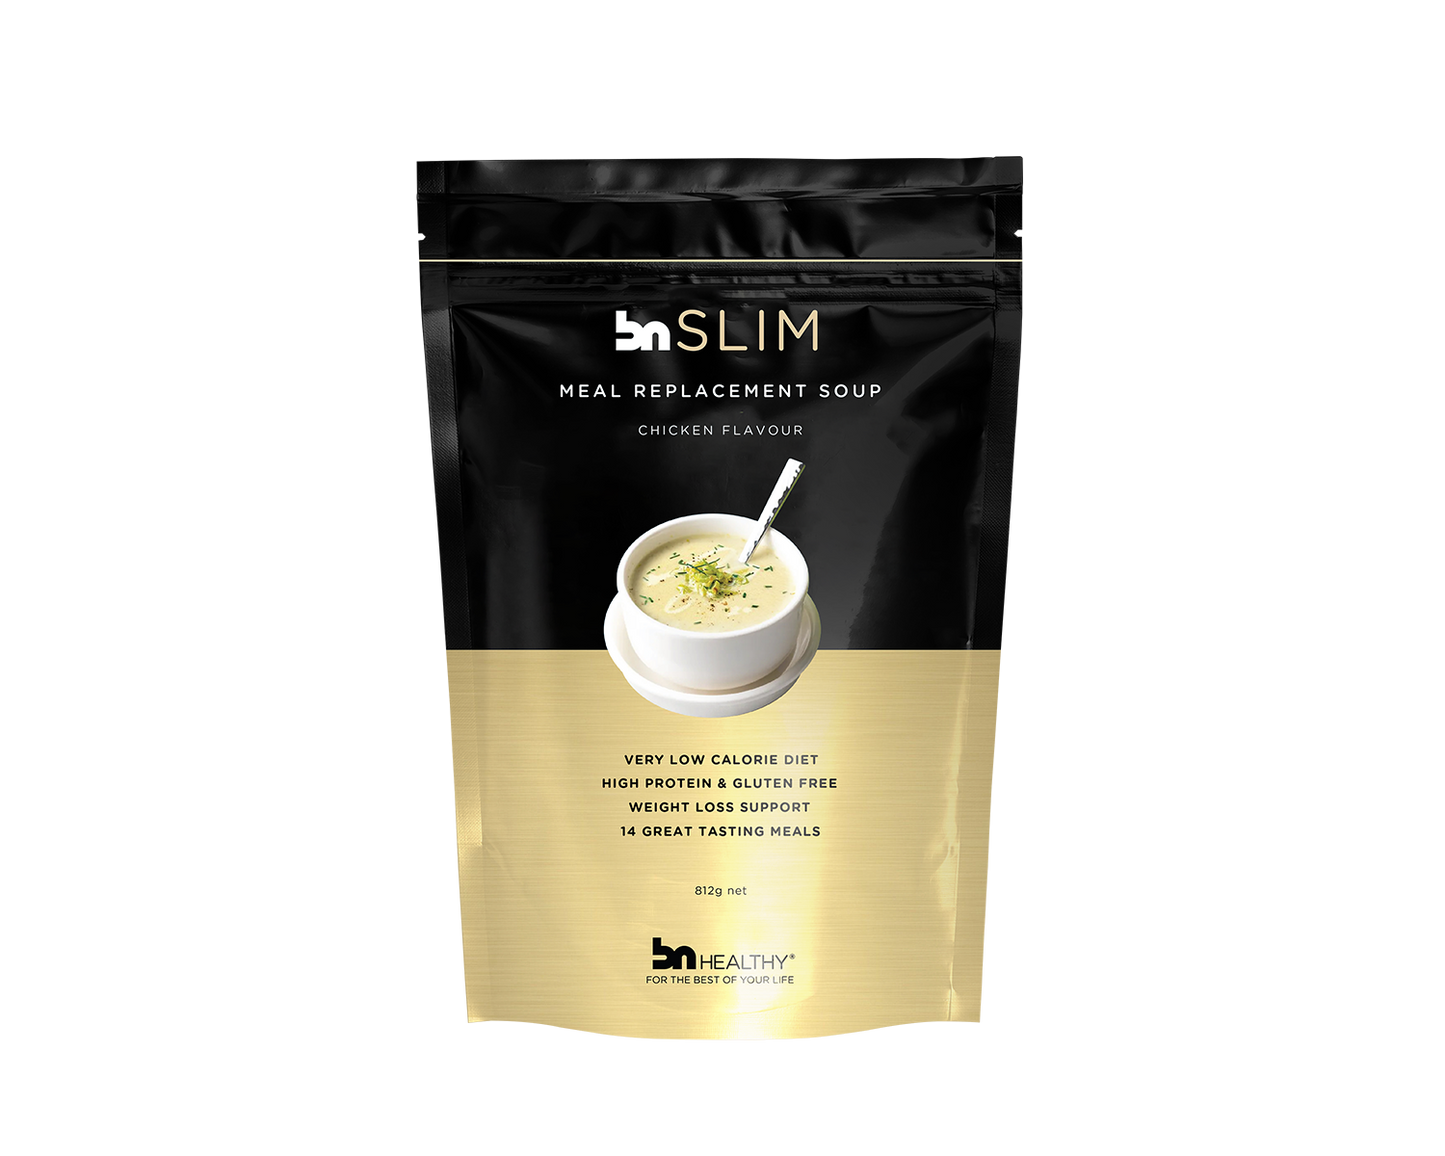 BN Slim - Meal Replacement Soup chicken flavour